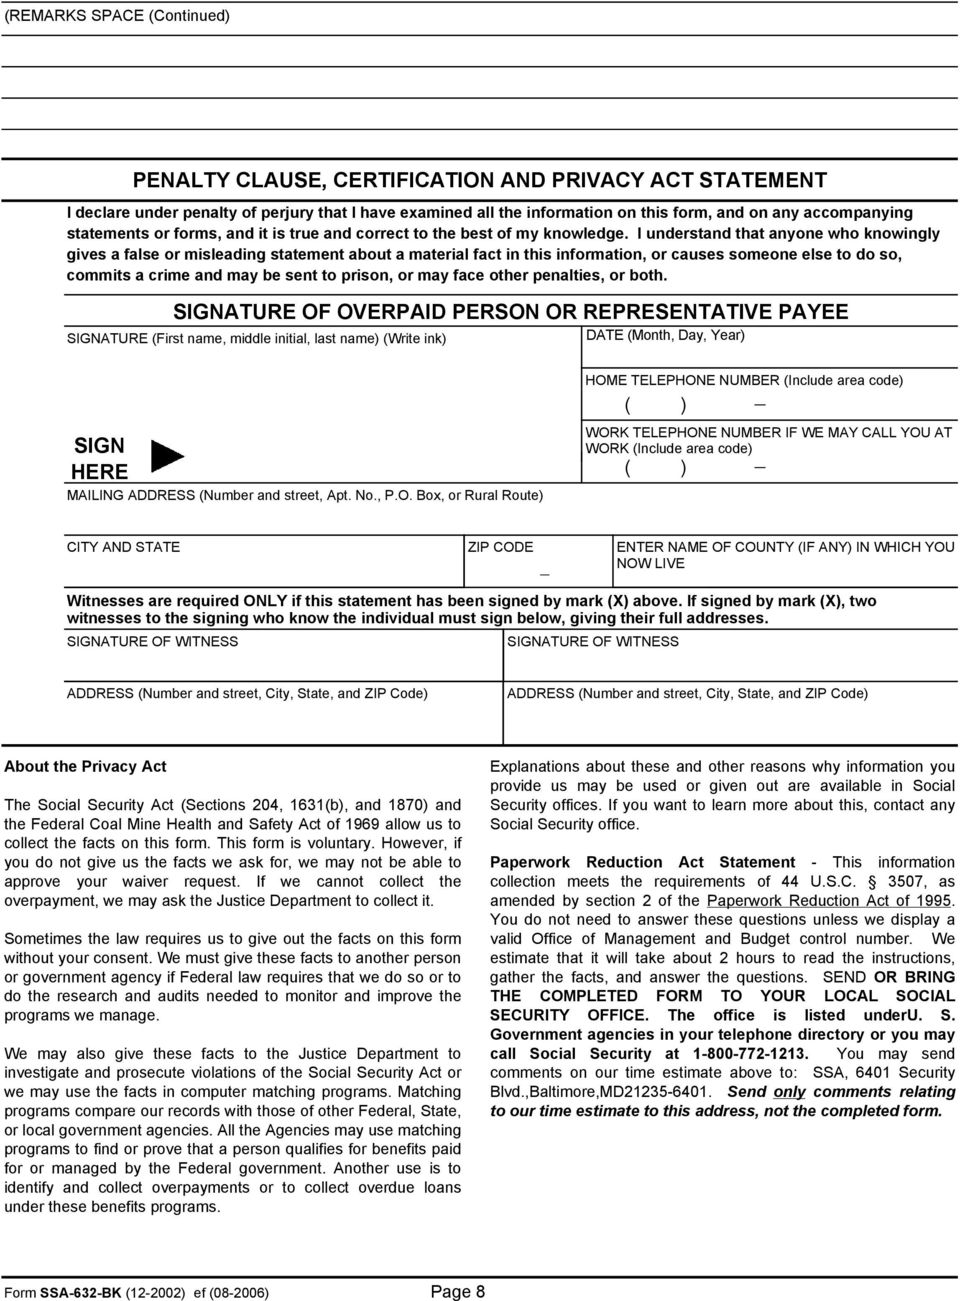 Social Security Administration Omb No Pdf Free Download